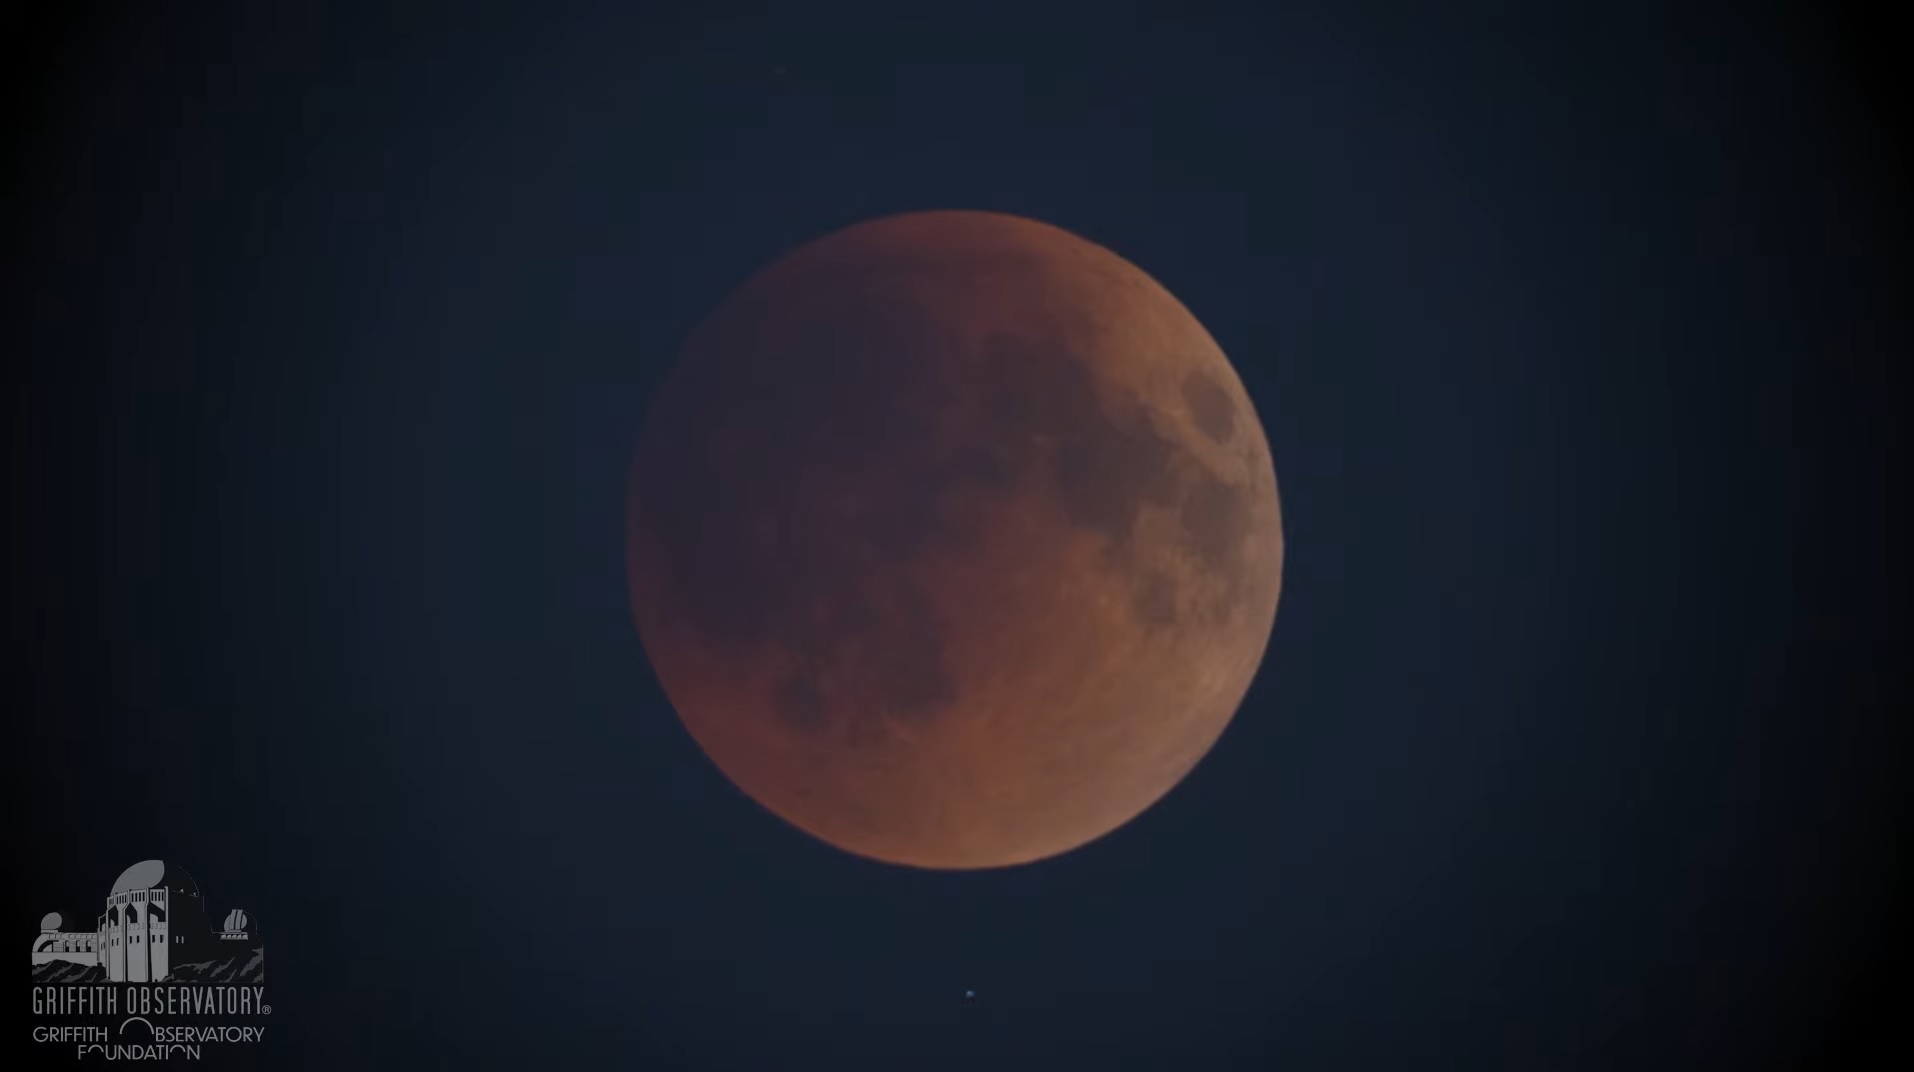 The moon turns red during the Super Flower Blood Moon total lunar eclipse of May 15, 2022 as seen by a telescope at the Griffith Observatory in Los Angeles, California.